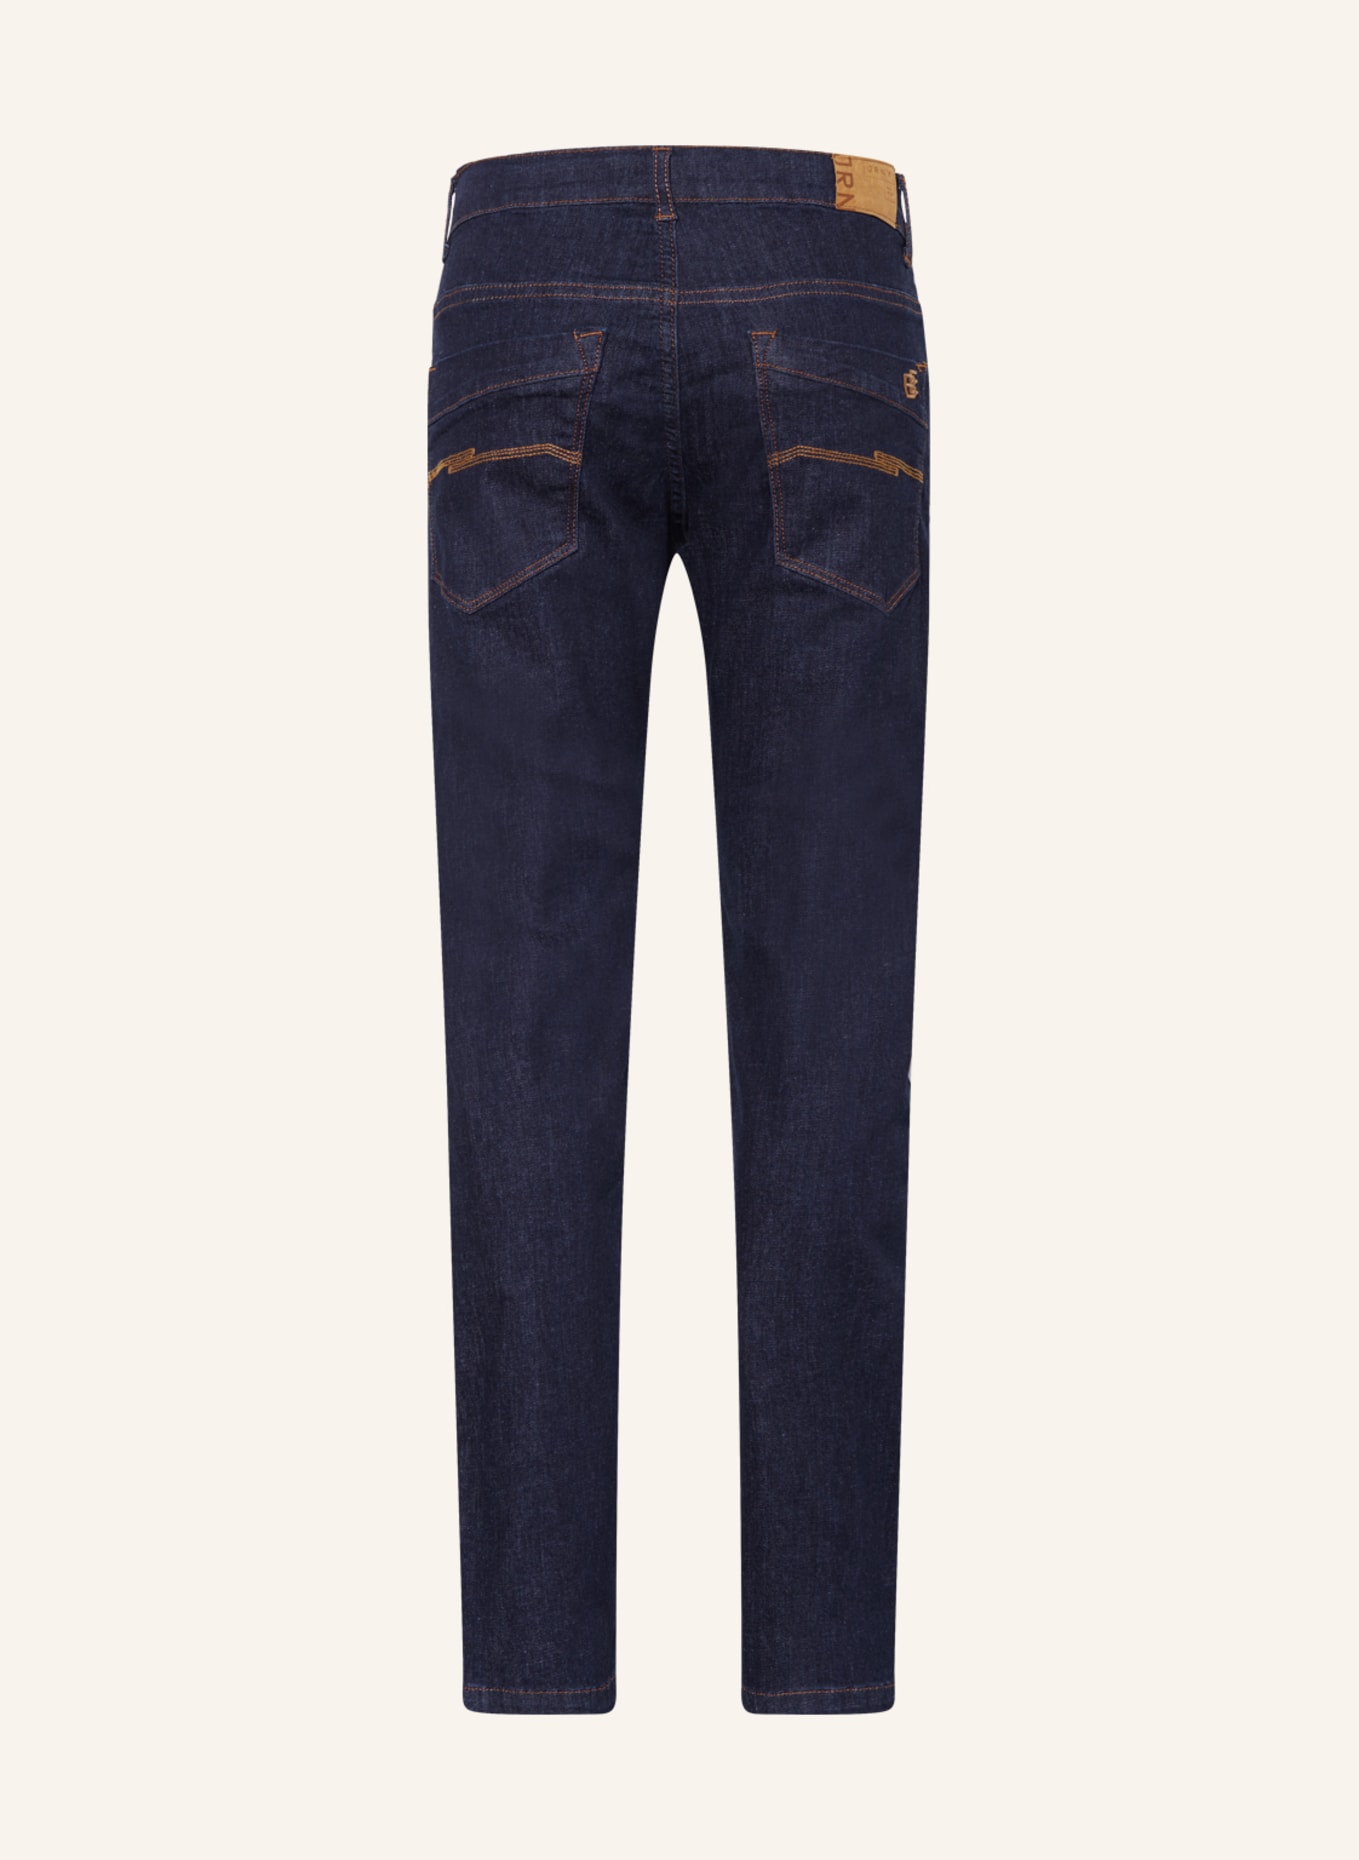 BLUE EFFECT Jeans JRNY Relaxed Fit, Farbe: 9937 clean rinsed (Bild 2)